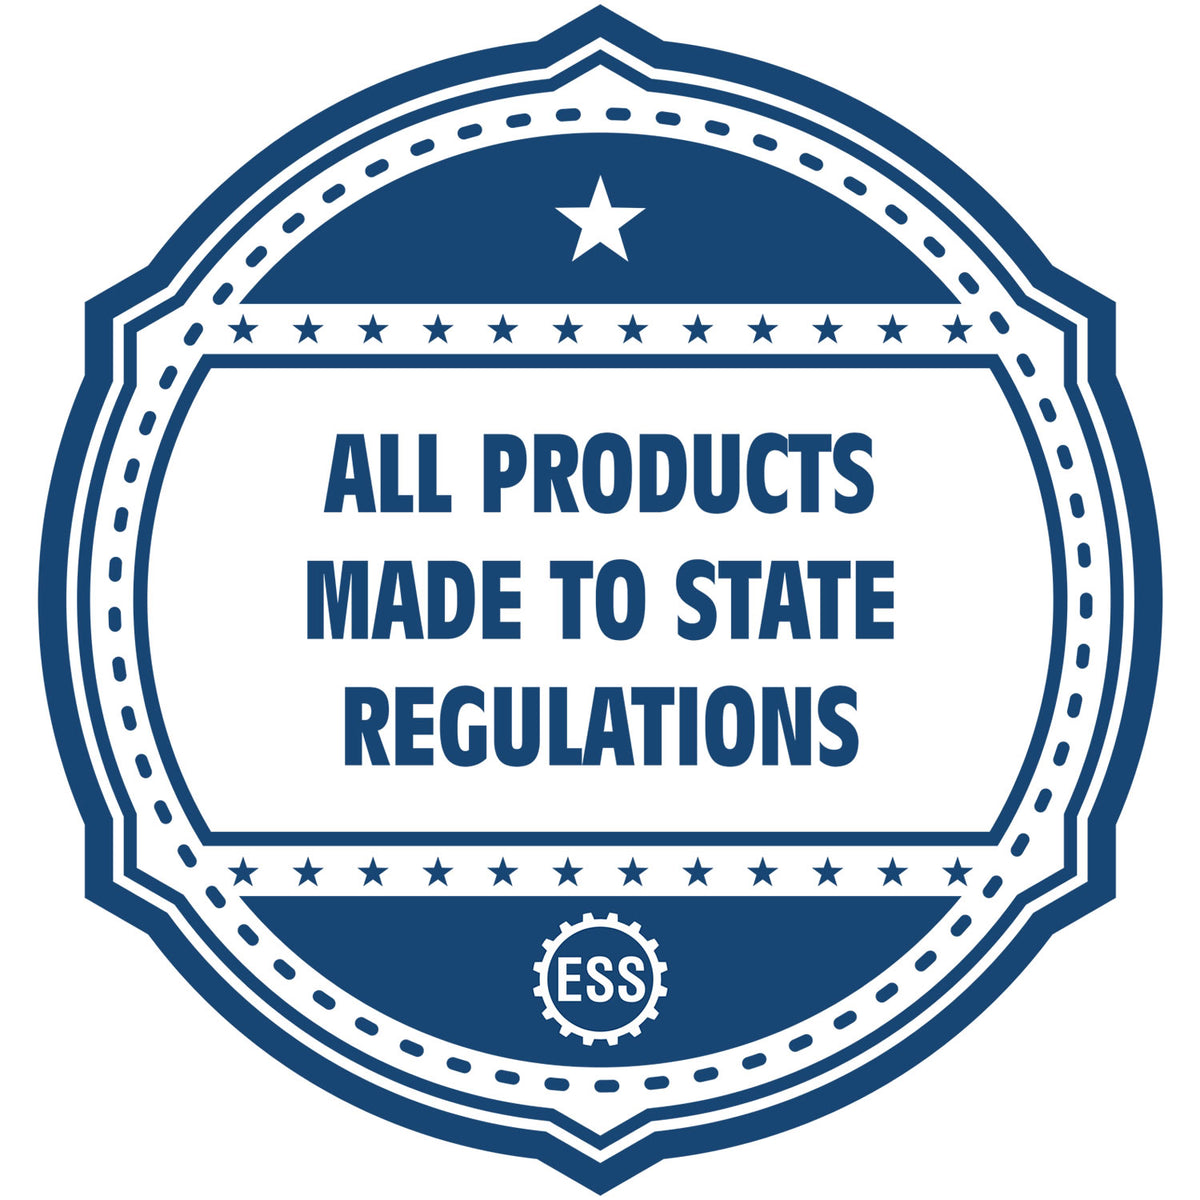 An icon or badge element for the State of Illinois Long Reach Architectural Embossing Seal showing that this product is made in compliance with state regulations.